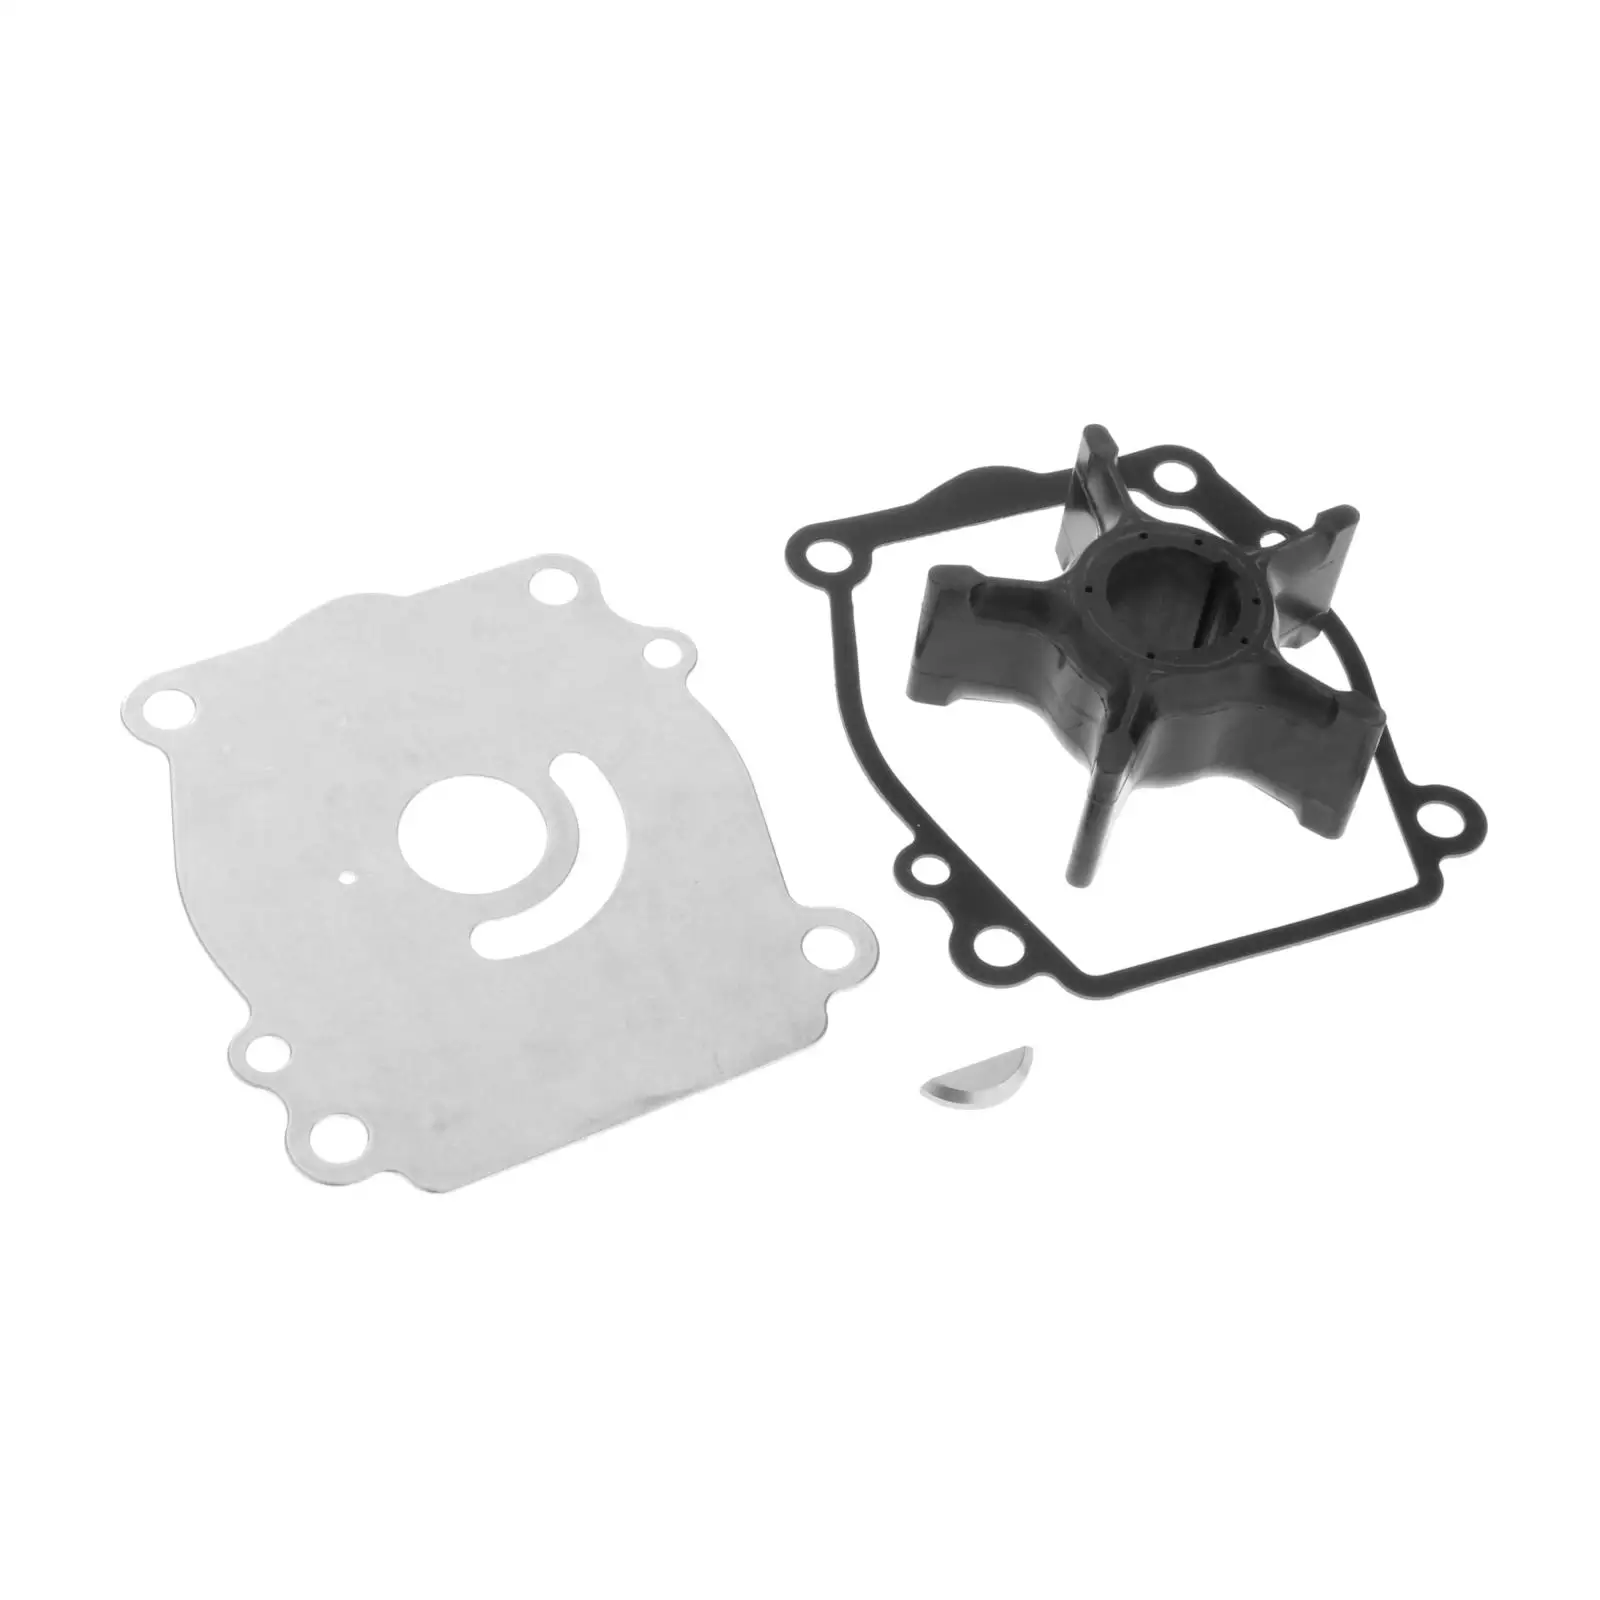 Water Pump Impeller Service Kit Fit for Suzuki Outboard DT150-225 18-3253 17400-87D11 Model Replacement Acc 1 Set